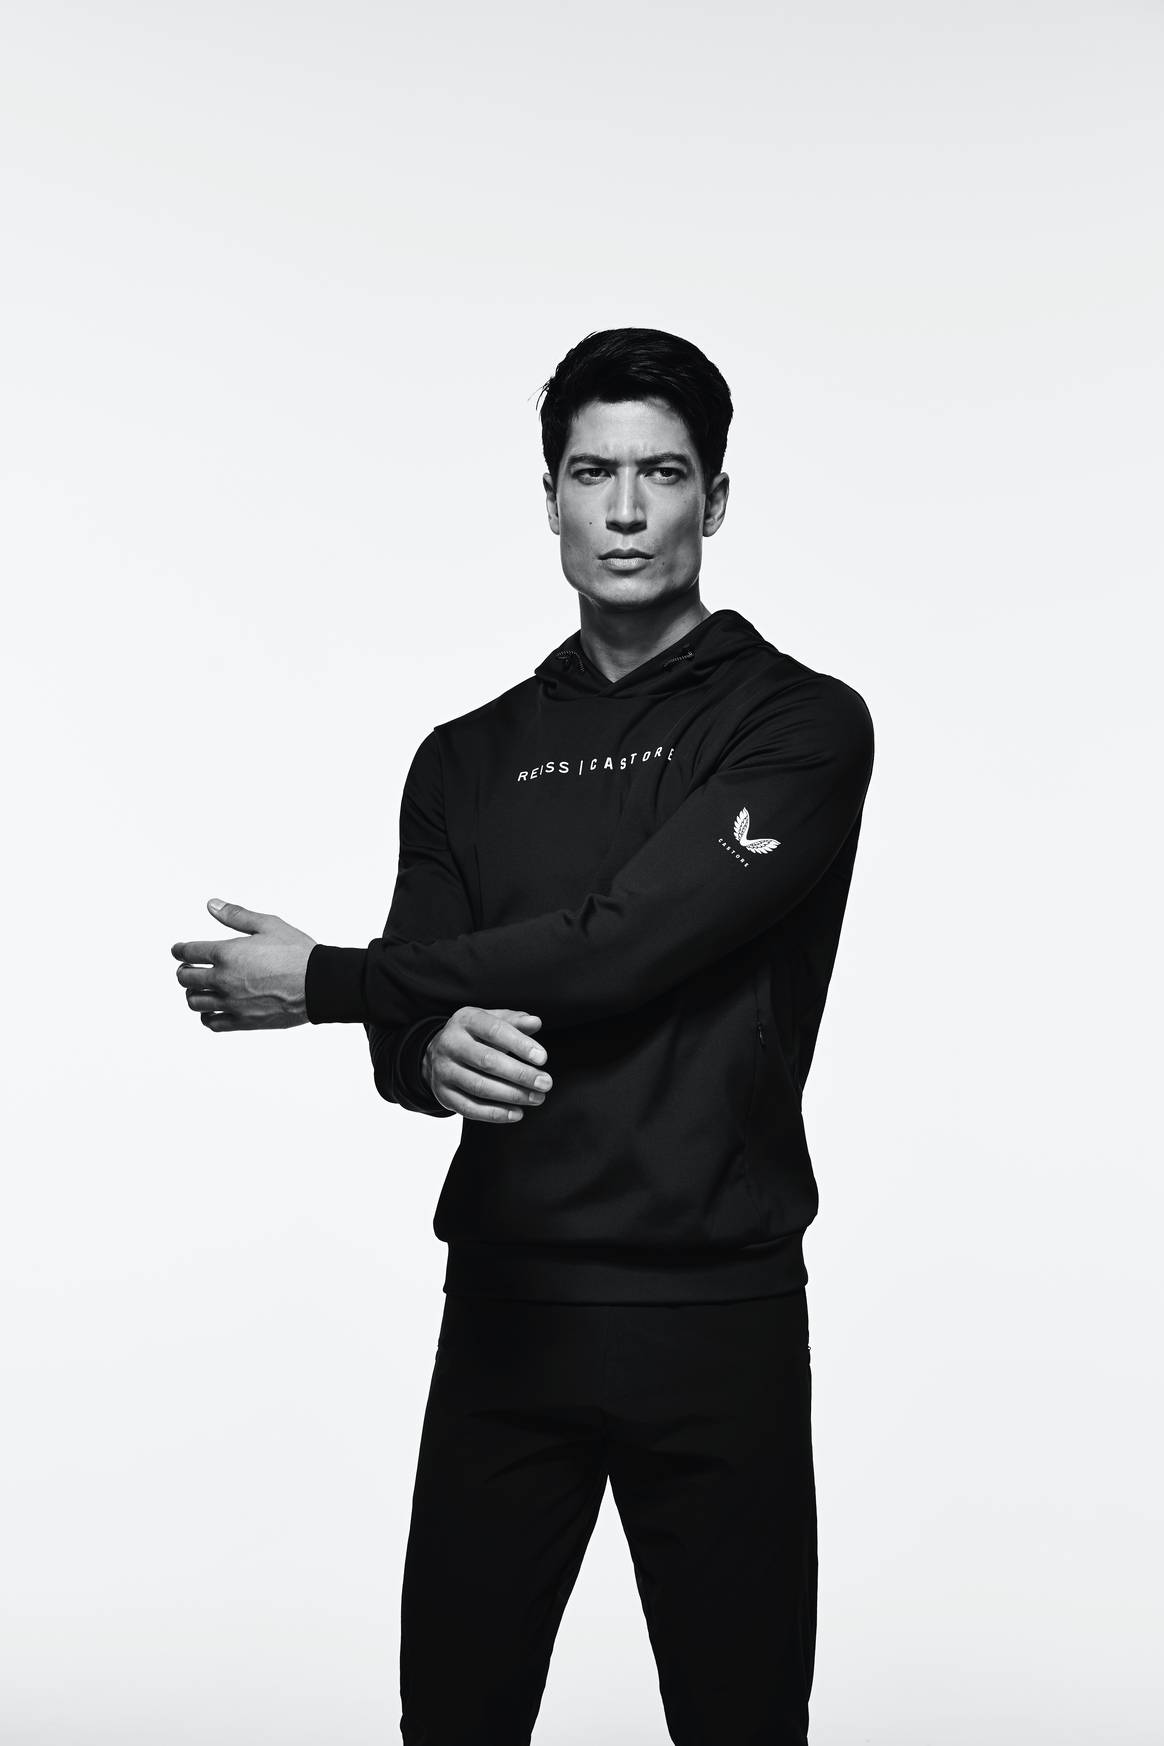 Reiss and Castore team up on activewear for men